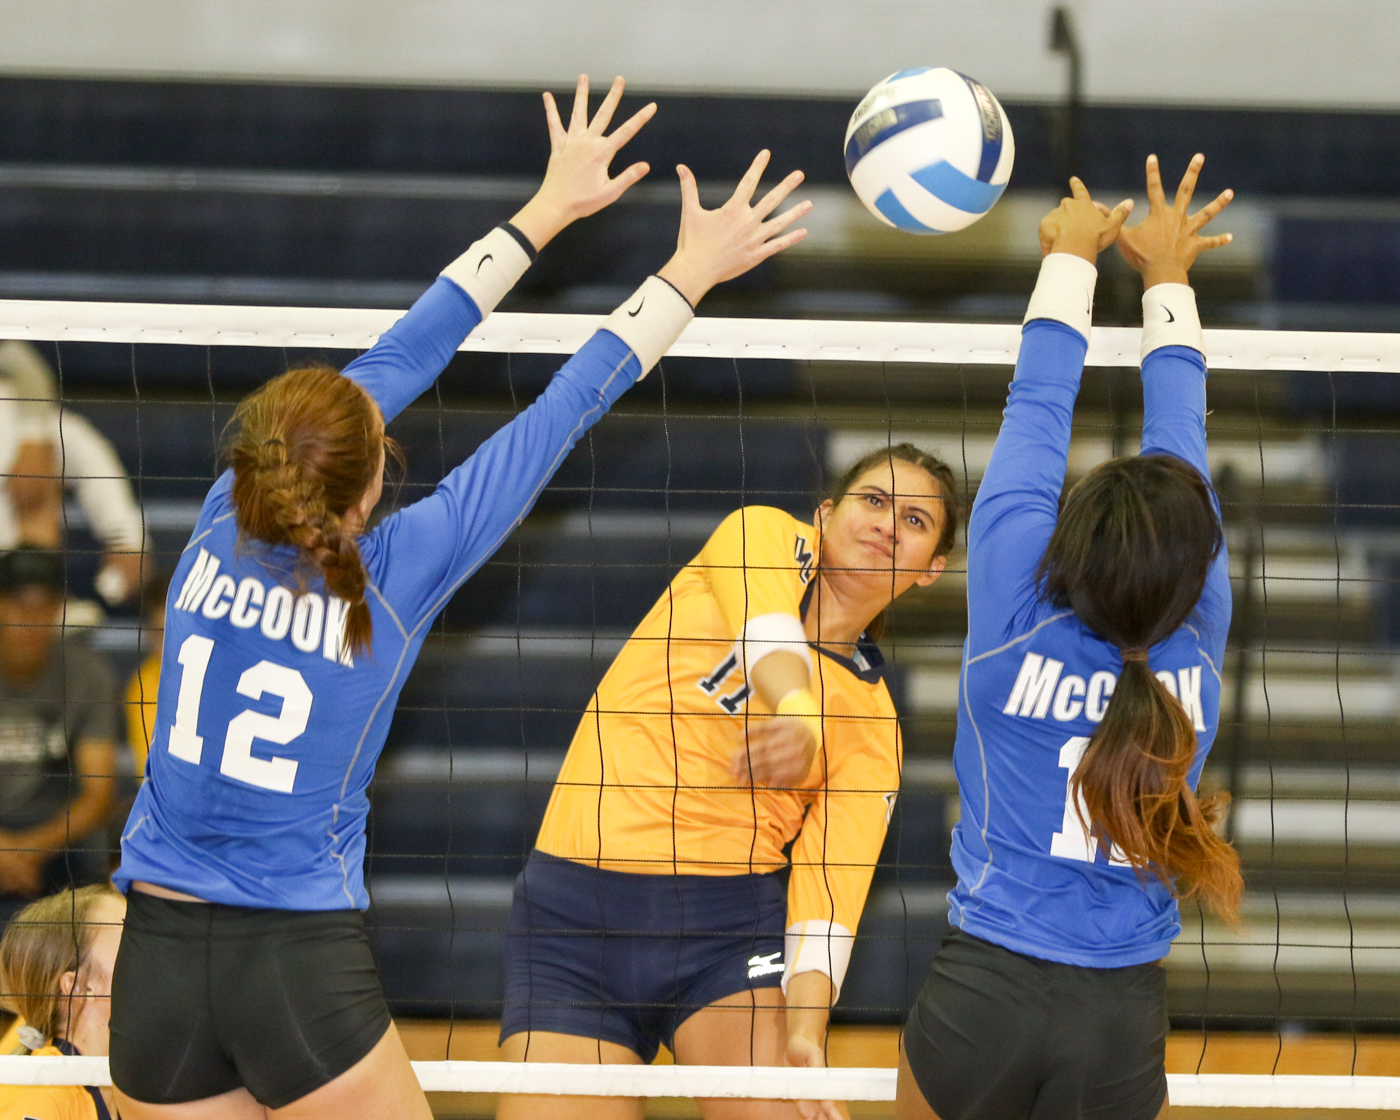 WNCC tops McCook for ninth straight win